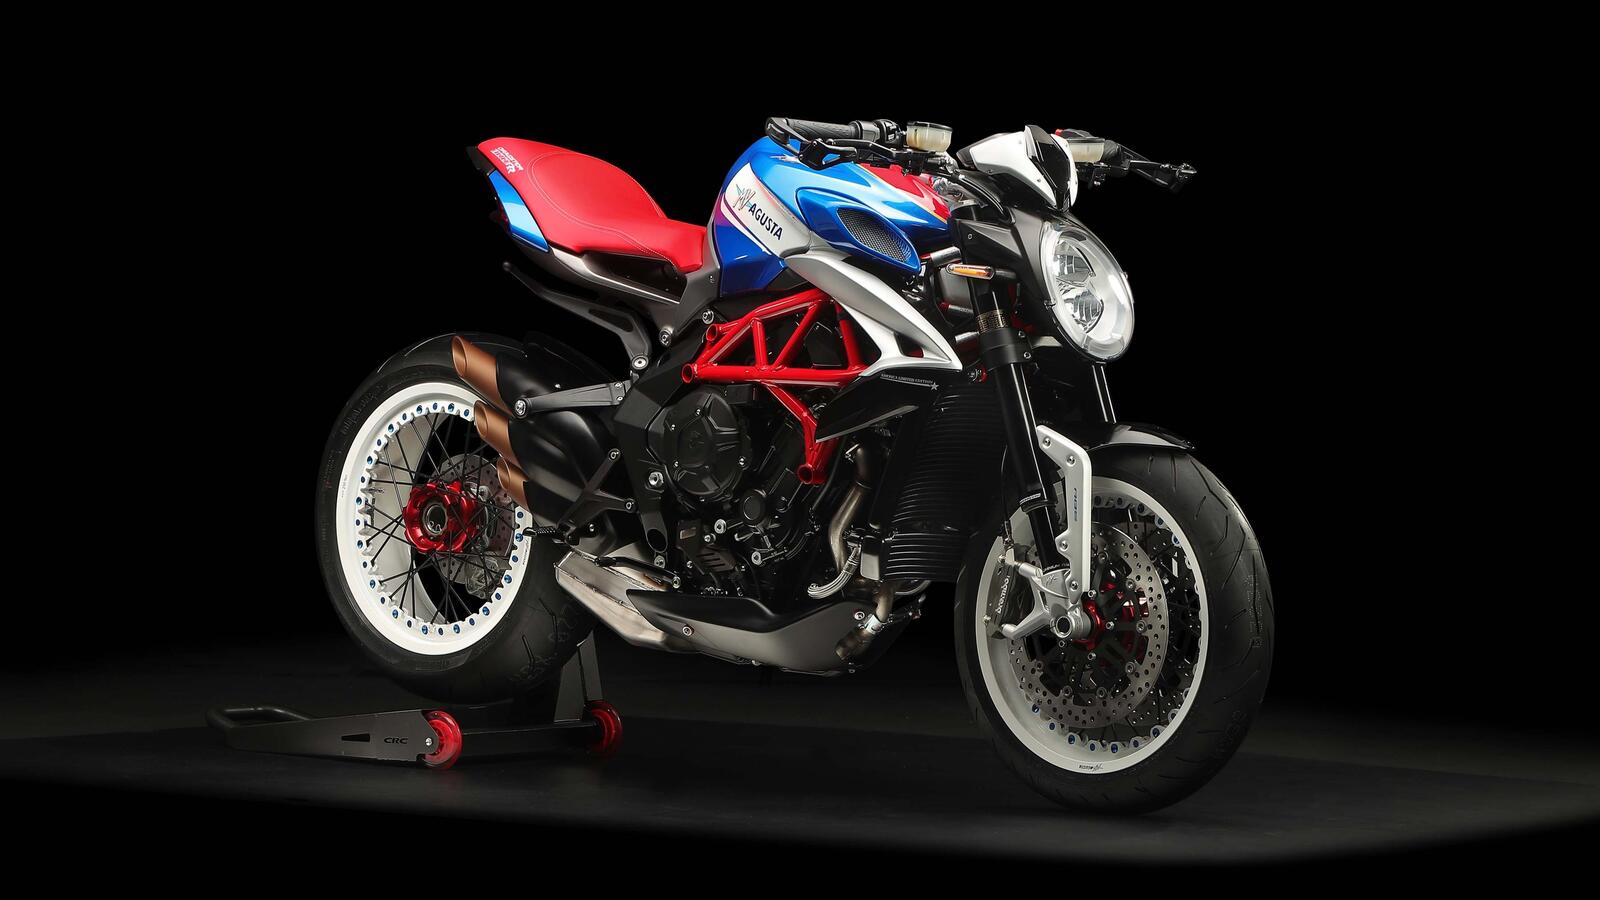 Free photo Motorcycle mv agusta dragster 800 rr america on black background